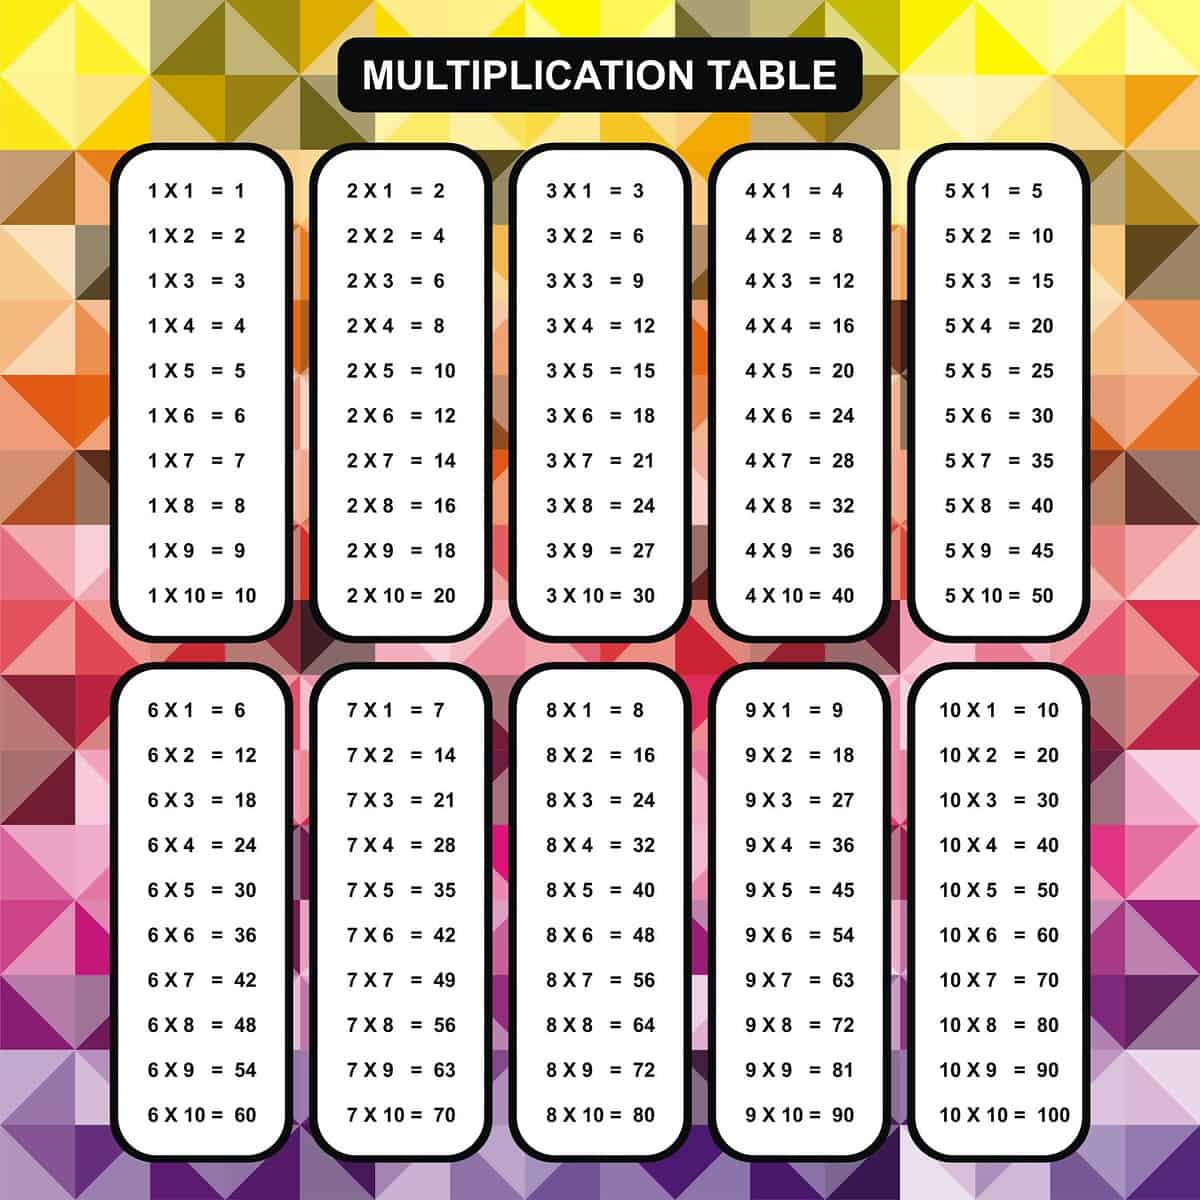 Multiplication Table - Educational Material for Primary School Level - Colorful Abstract Background One, Two, Three, Four, Five, Six, Seven, Eight, Nine, Ten - Helpful For Children, Classroom